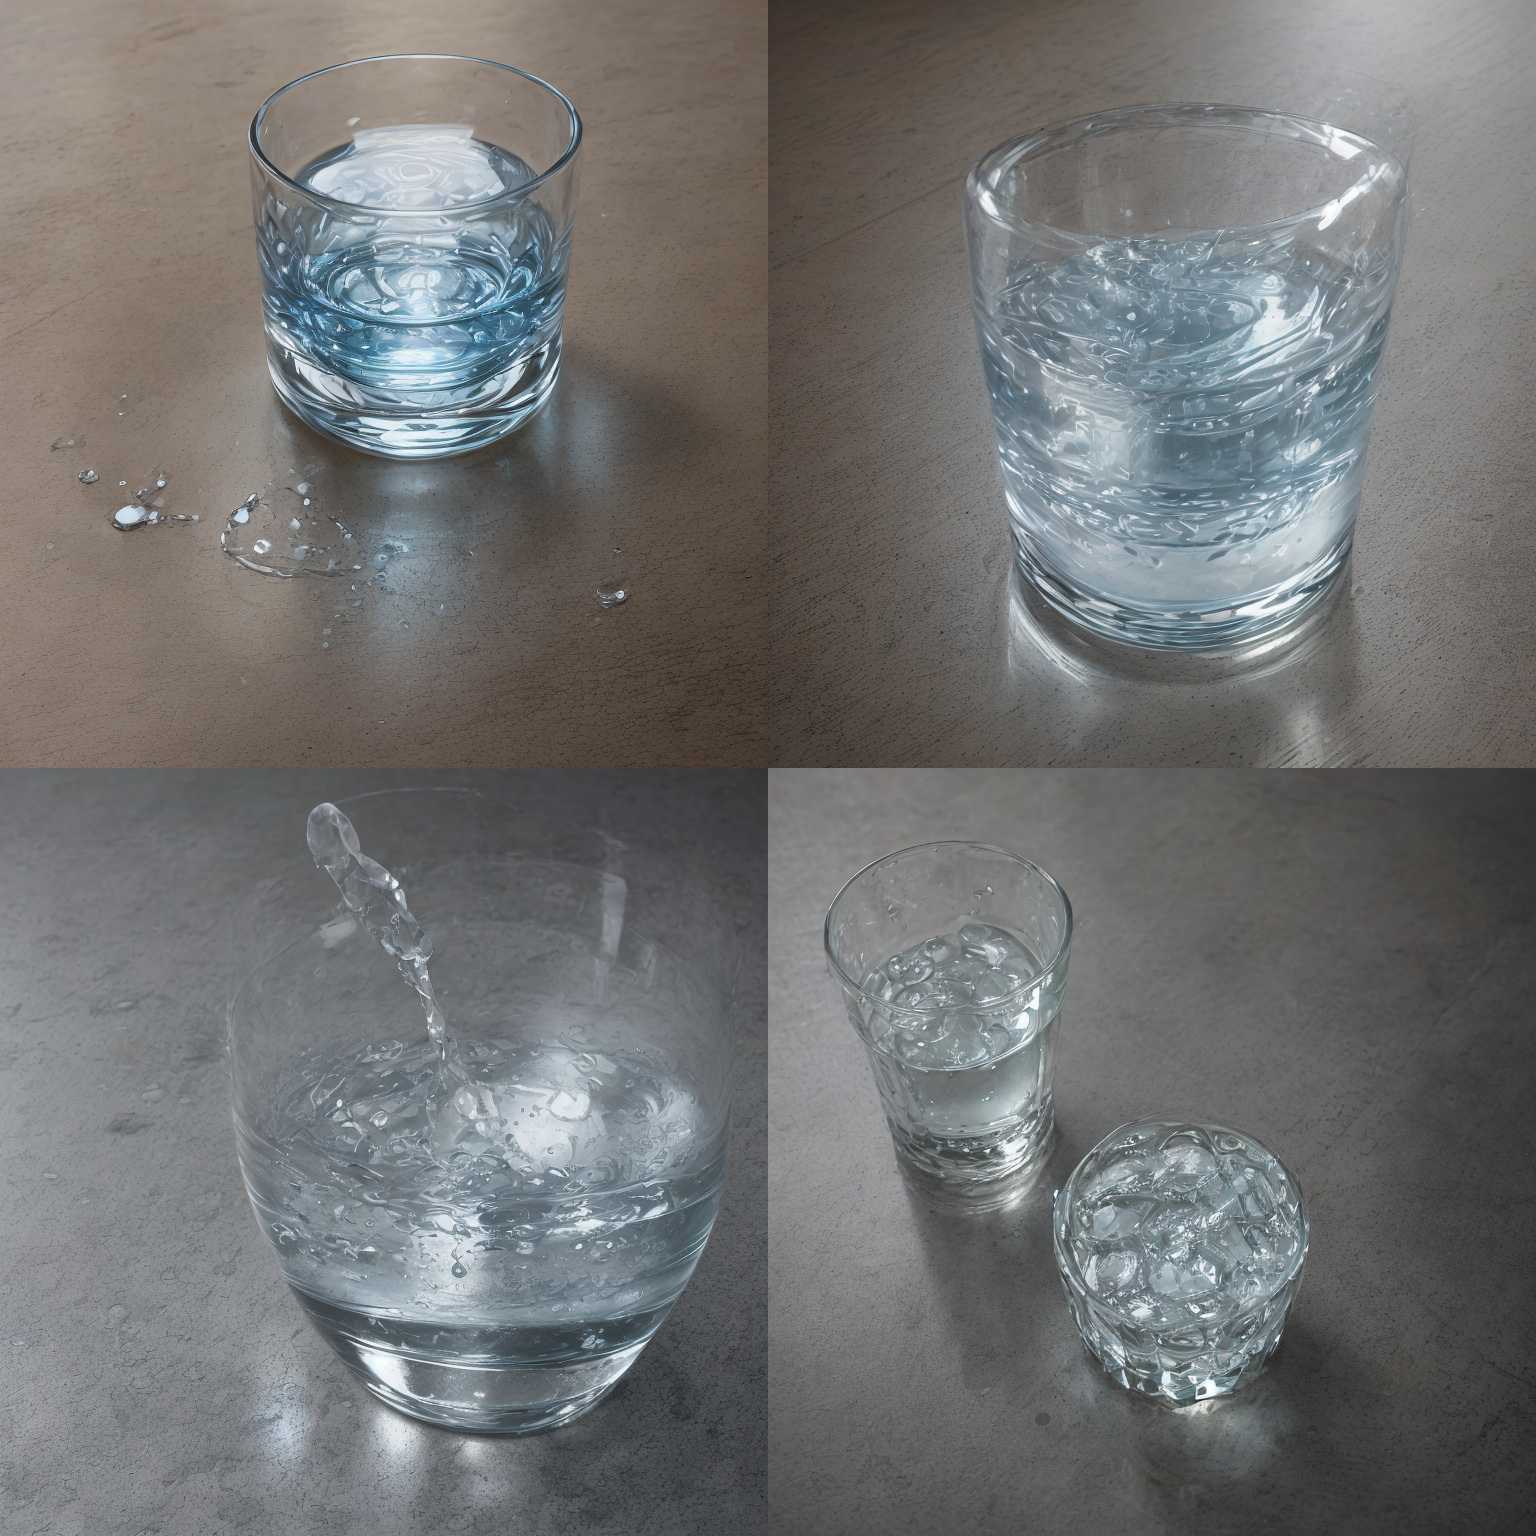 A glass of water dropped on the floor